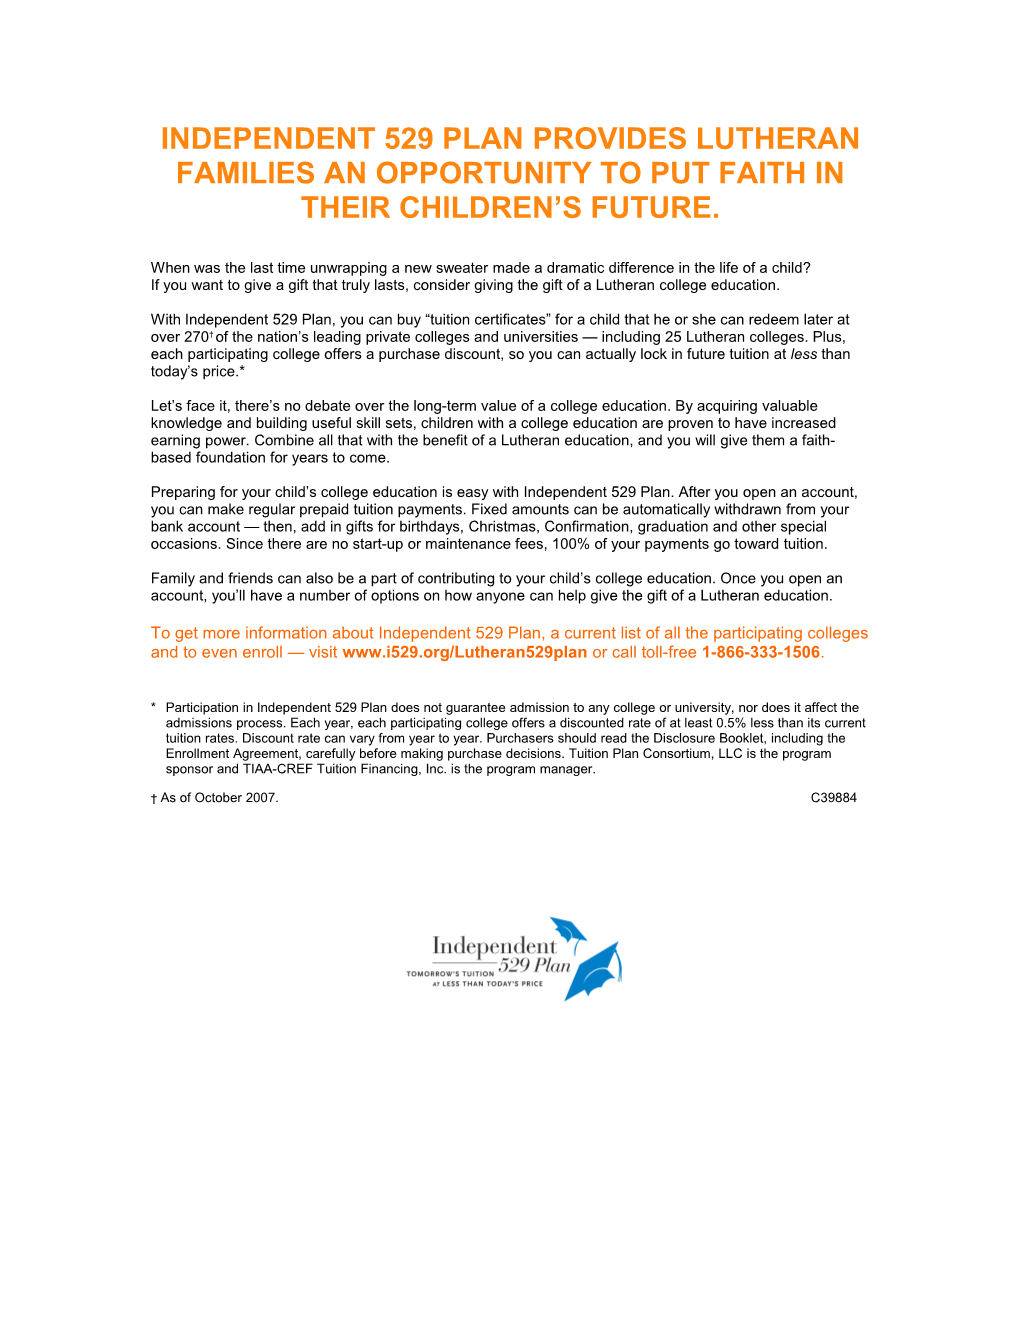 Independent 529 Plan Provides Lutheran Families an Opportunity to Put Faith in Their Children